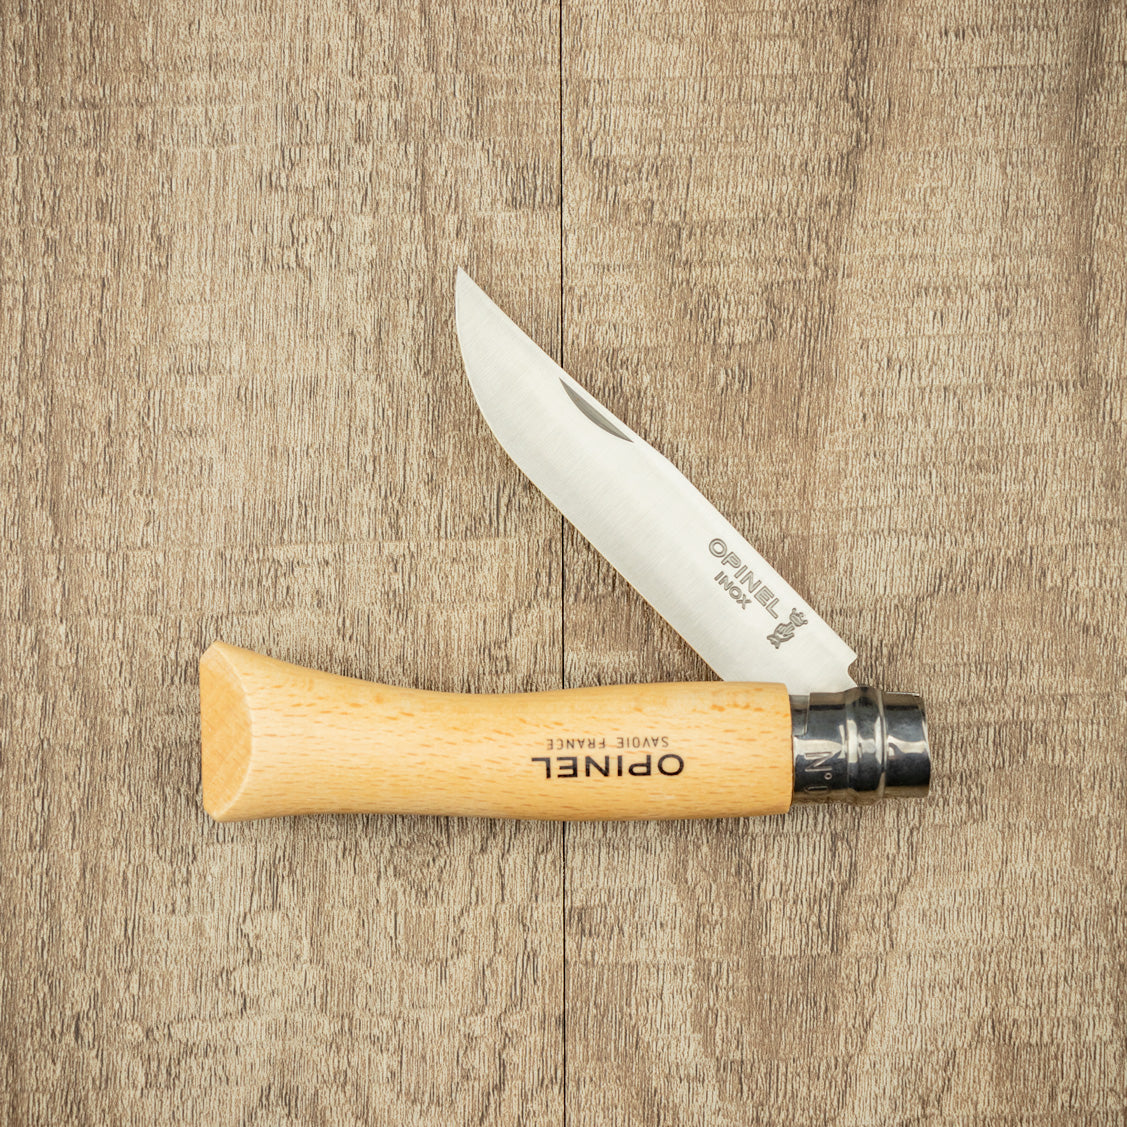 Opinel  No.07 Carbon Steel Folding Knife - OPINEL USA